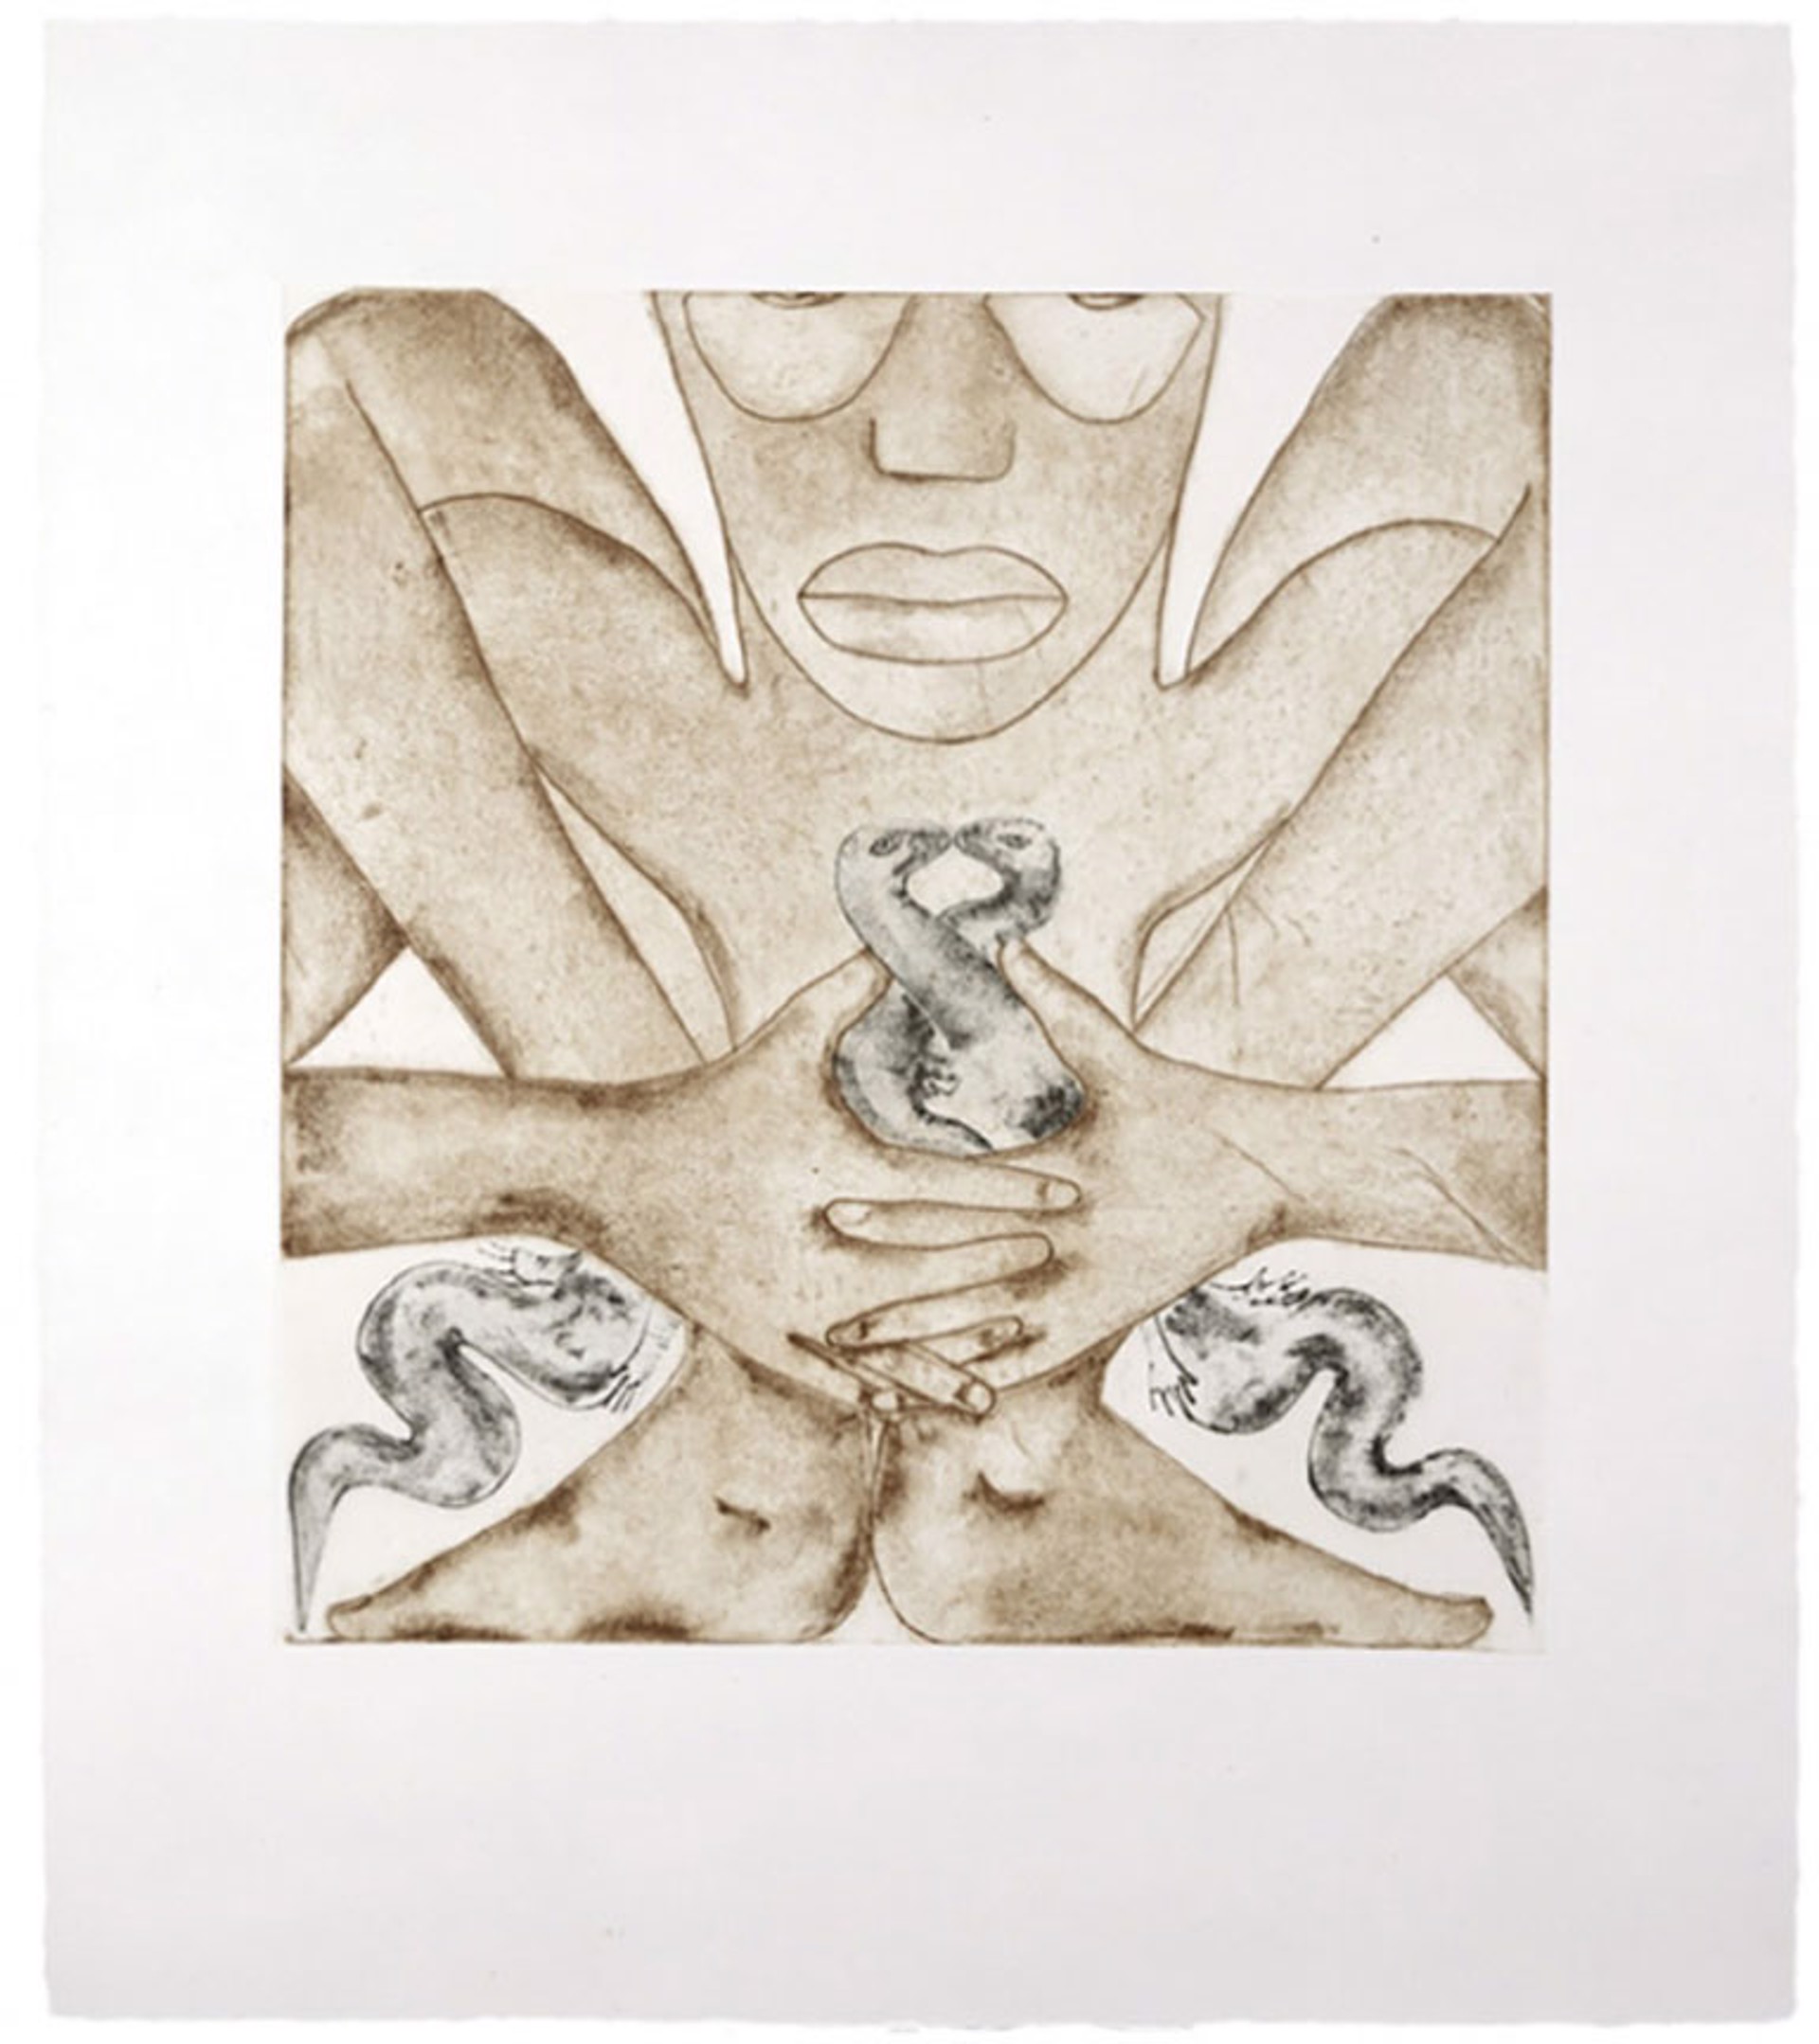 South, from Geography suite by Francesco Clemente